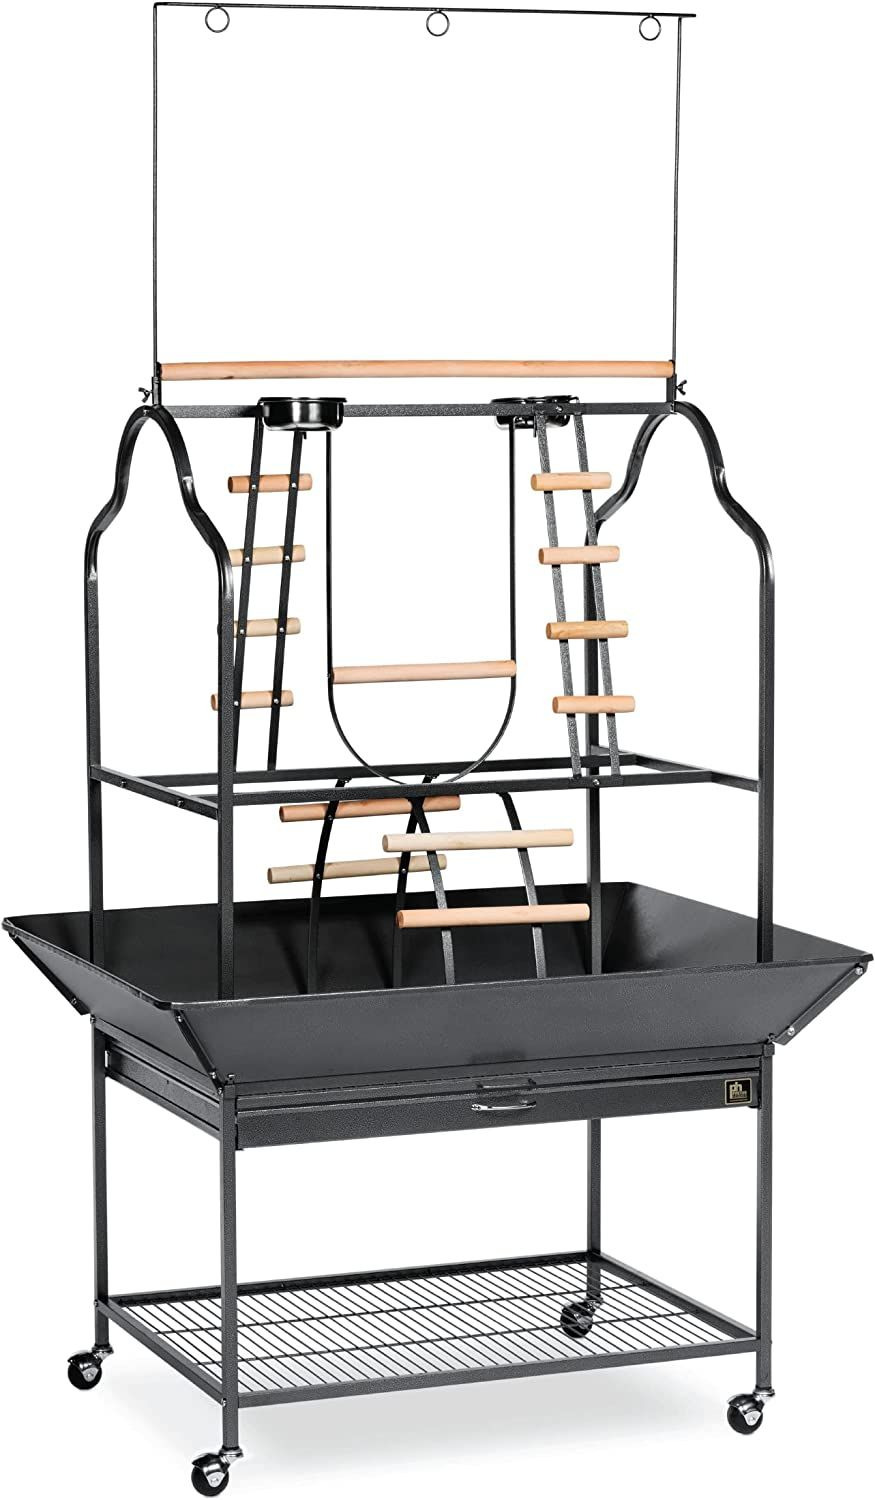 Prevue Pet Products Hendryx 3180 Parrot Playstand, Black... 